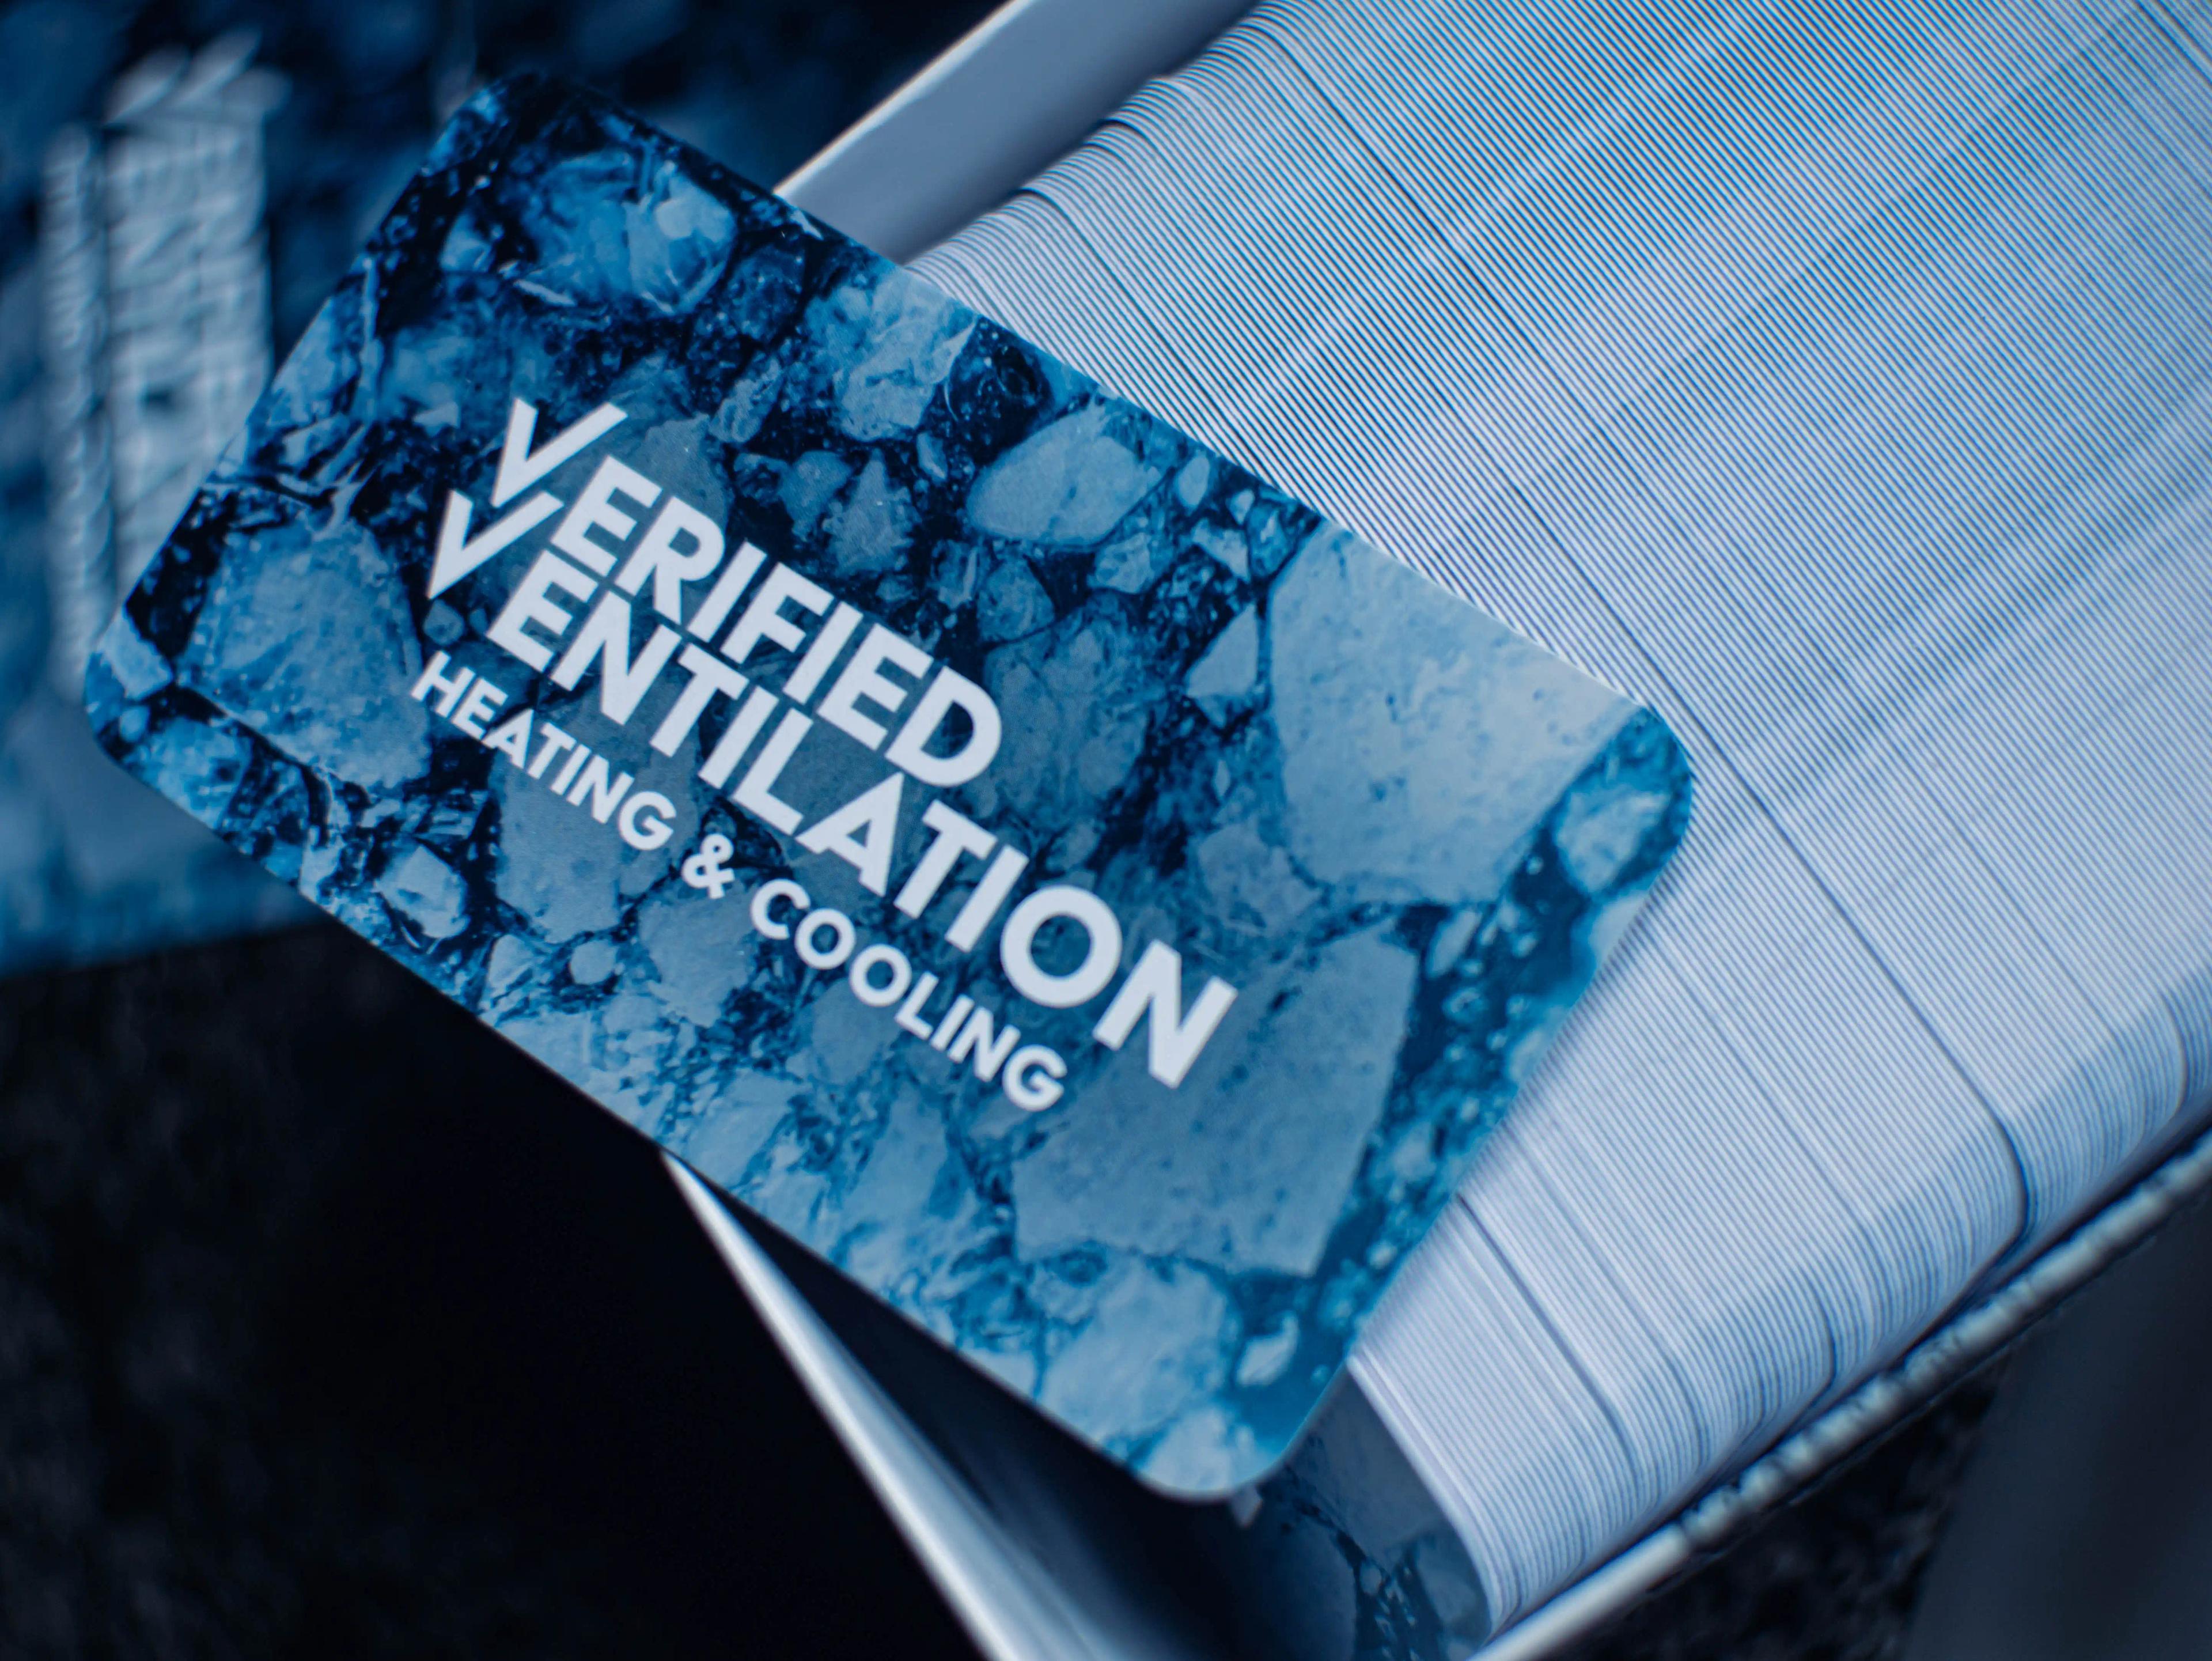 An image of Verified Ventilations business cards box full of cards with one card on top showing the front of the business card.